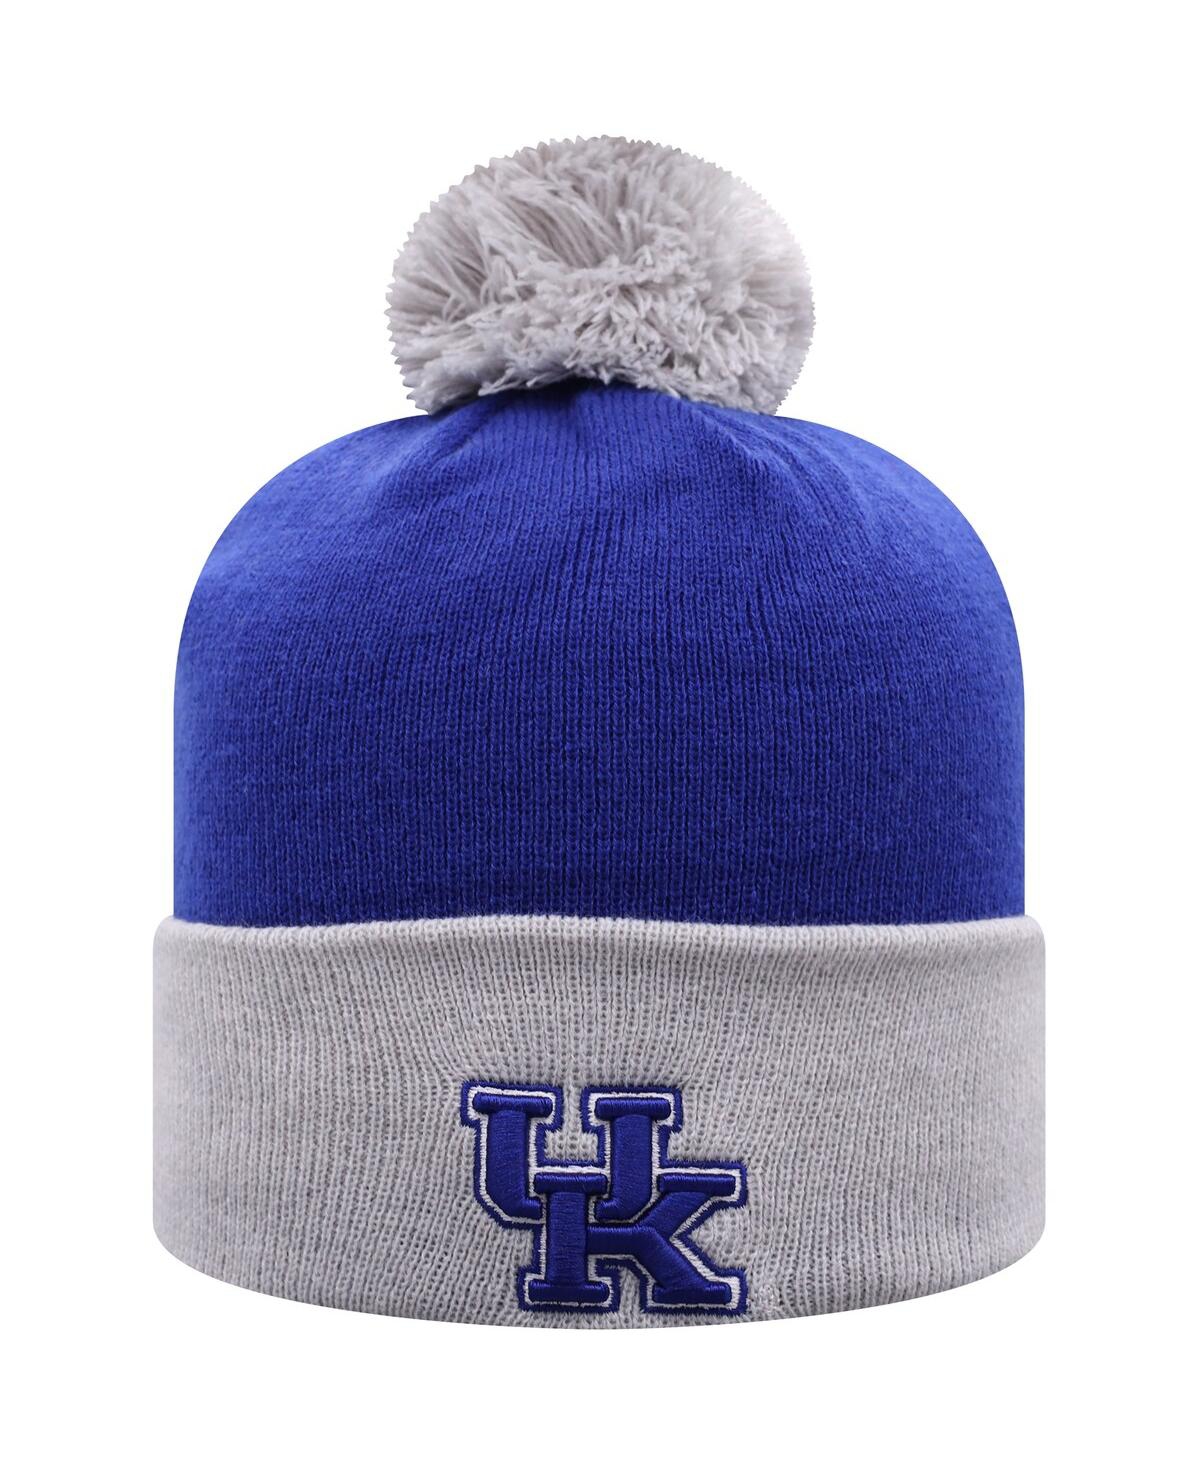 Top Of The World Men's  Royal And Gray Kentucky Wildcats Core 2-tone Cuffed Knit Hat With Pom In Royal,gray